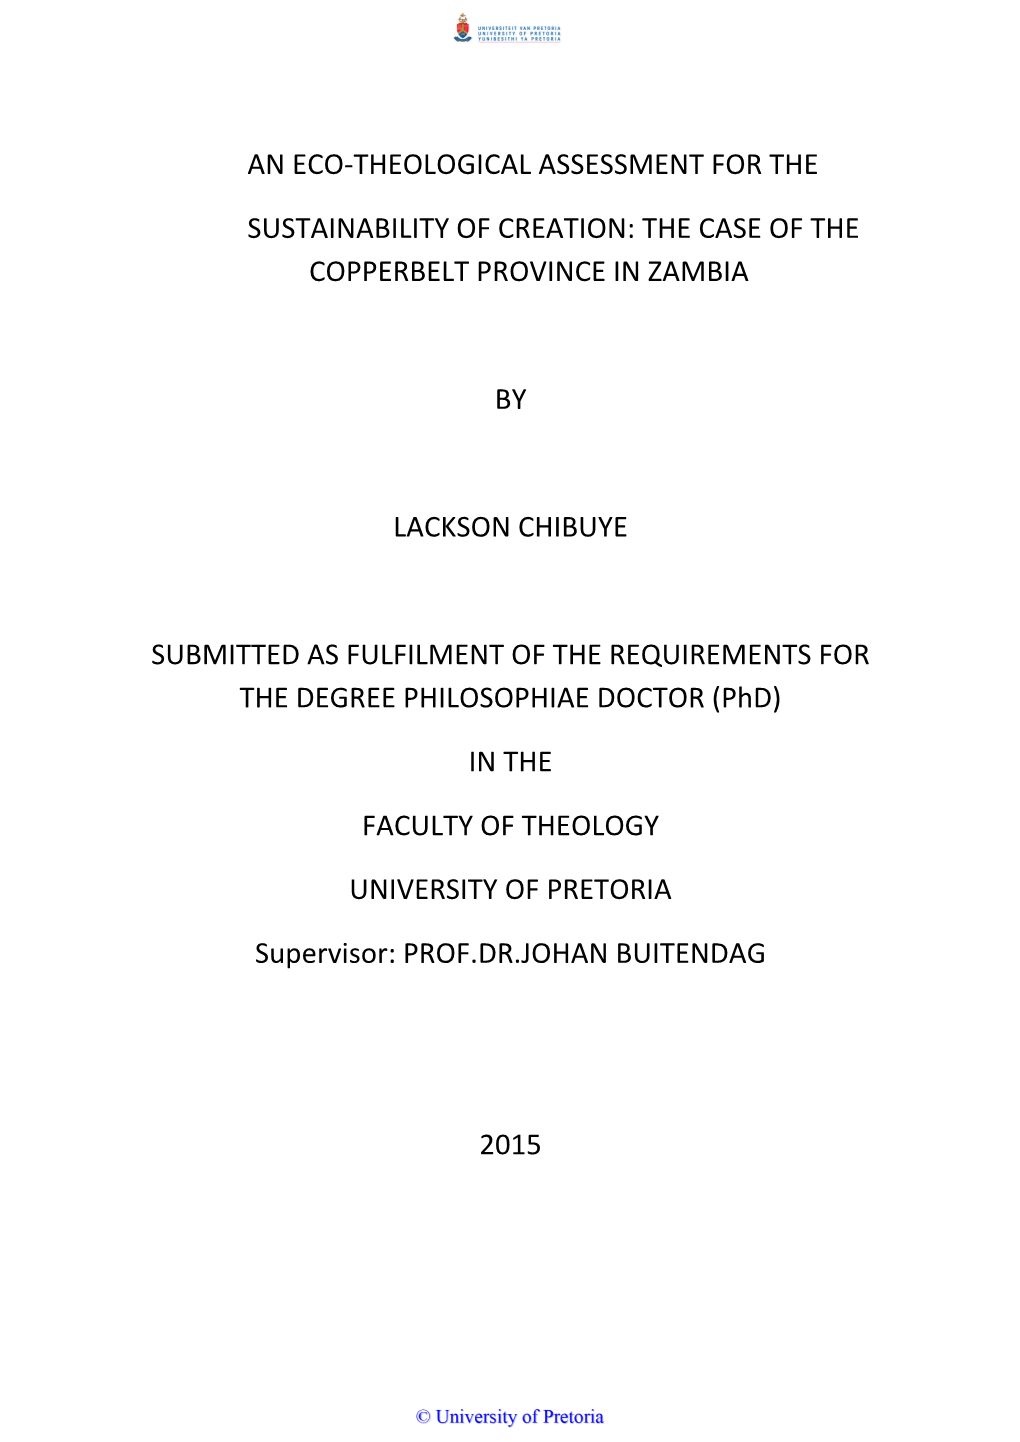 The Case of the Copperbelt Province in Zambia by Lackson